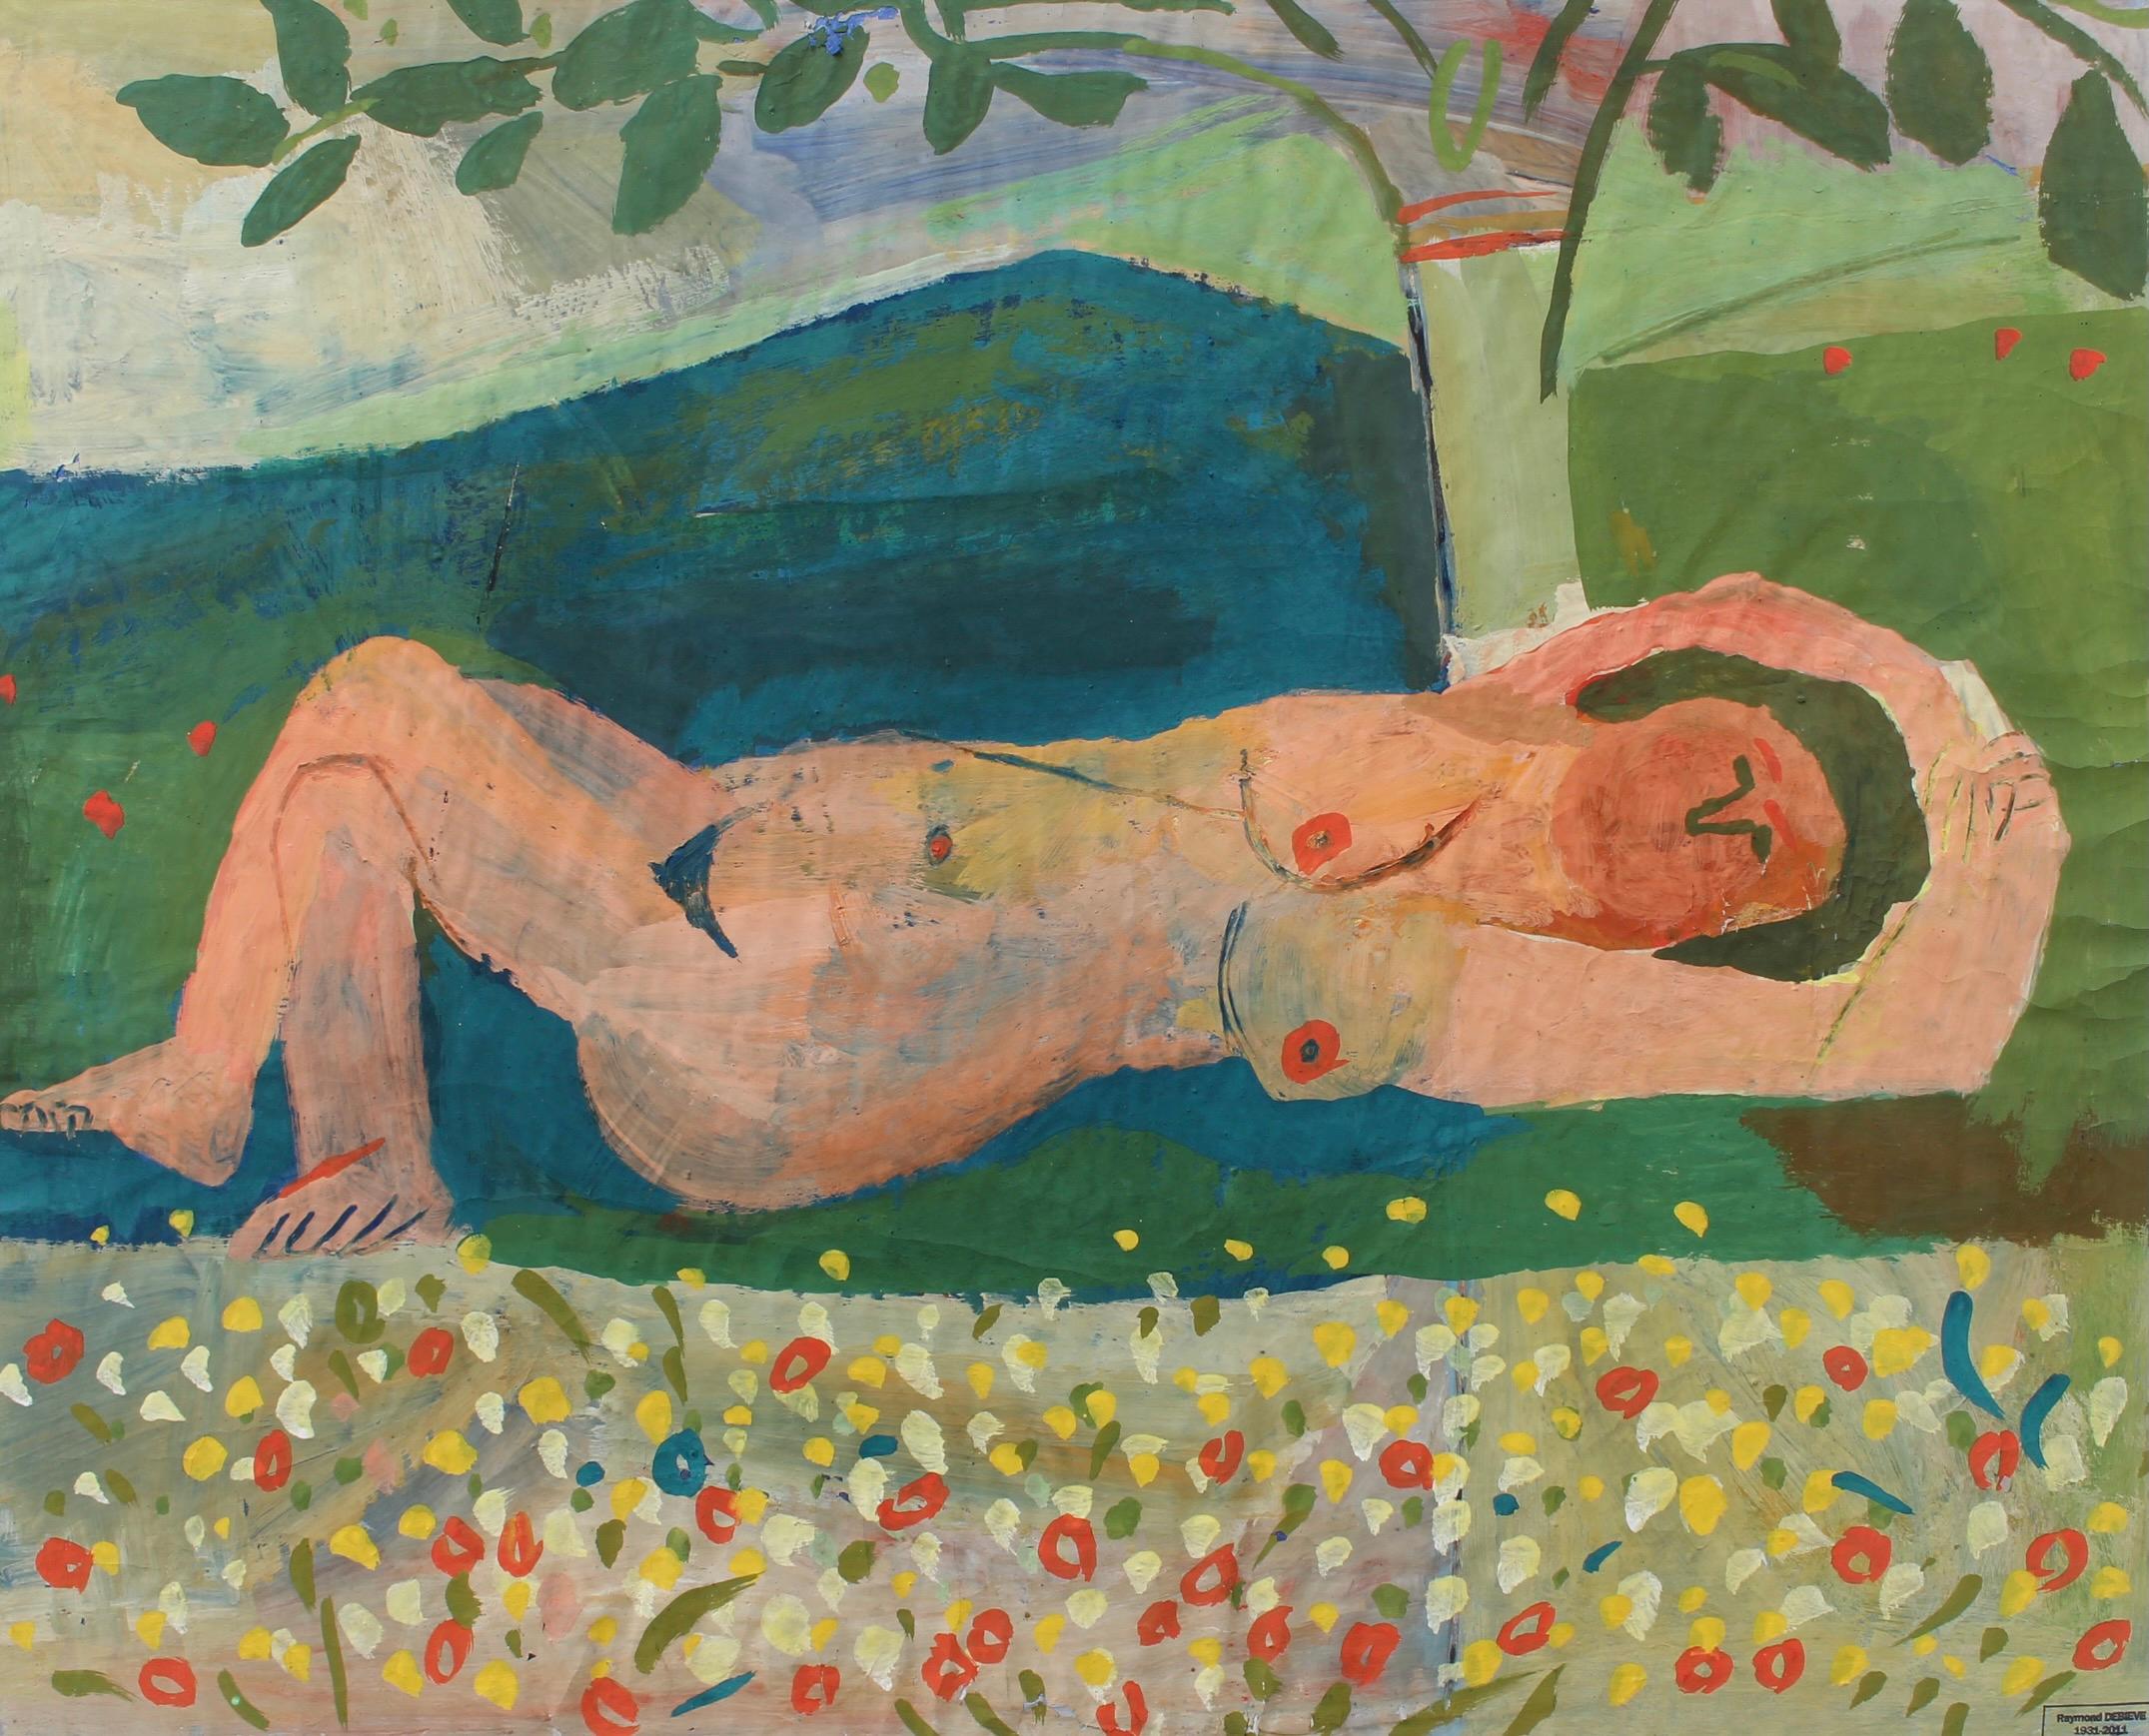 'Reclining Nude en Plein Aire', gouache on art paper, by Raymond Debiève (circa 1960s). The reclining figure is one of the most popular poses in art history. It is firmly embedded within western and eastern art historical traditions. The reclining